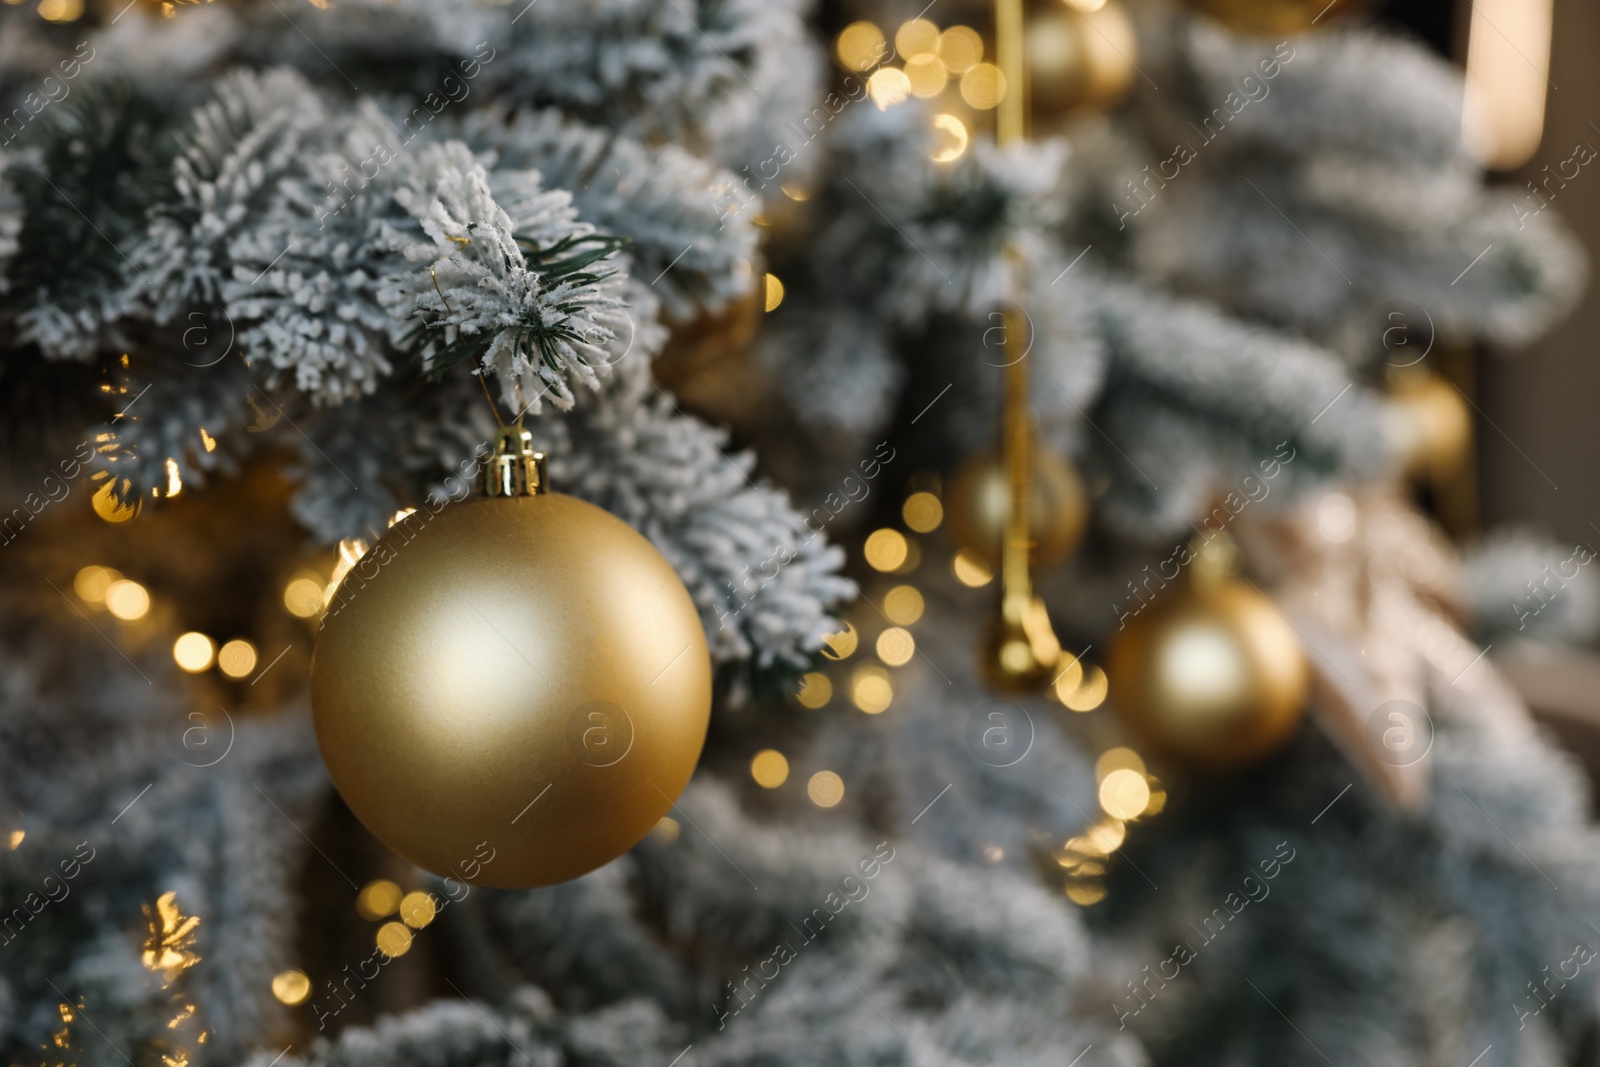 Photo of Beautiful decorated Christmas tree with baubles and lights as background, closeup